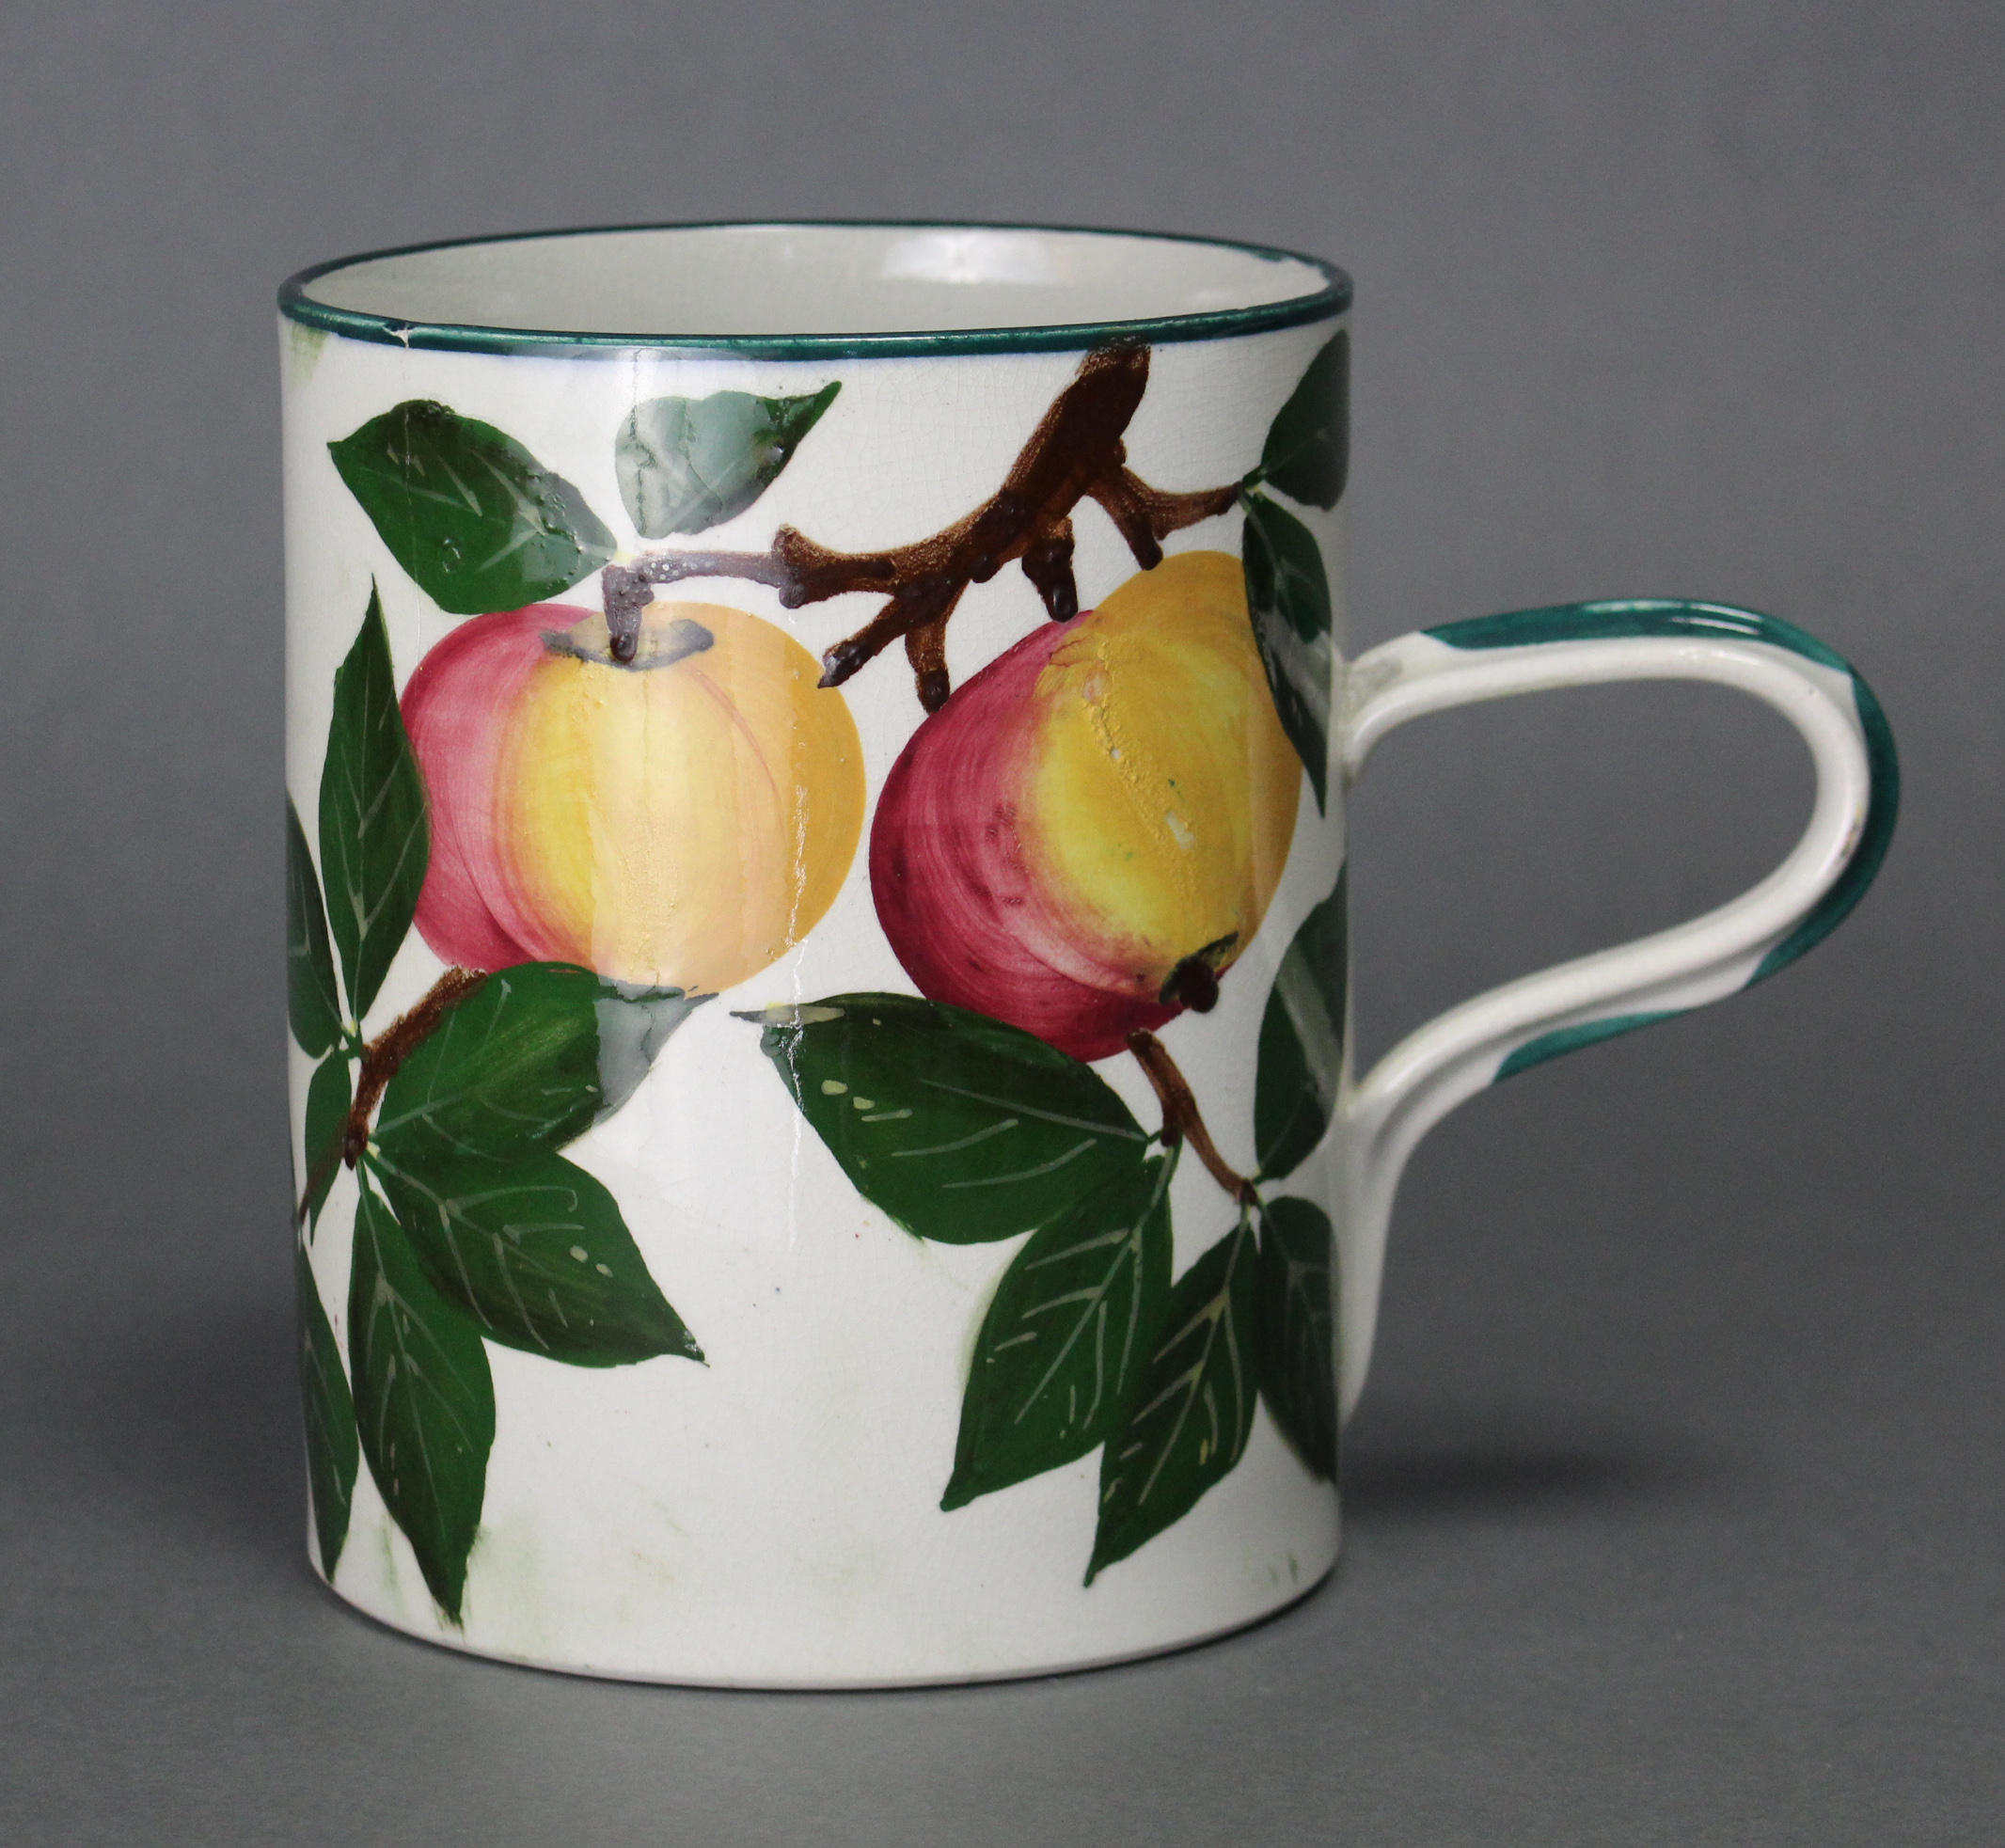 A Wemyss Ware (R. Heron & Son) pottery large cylindrical mug painted with the “Apples” pattern;